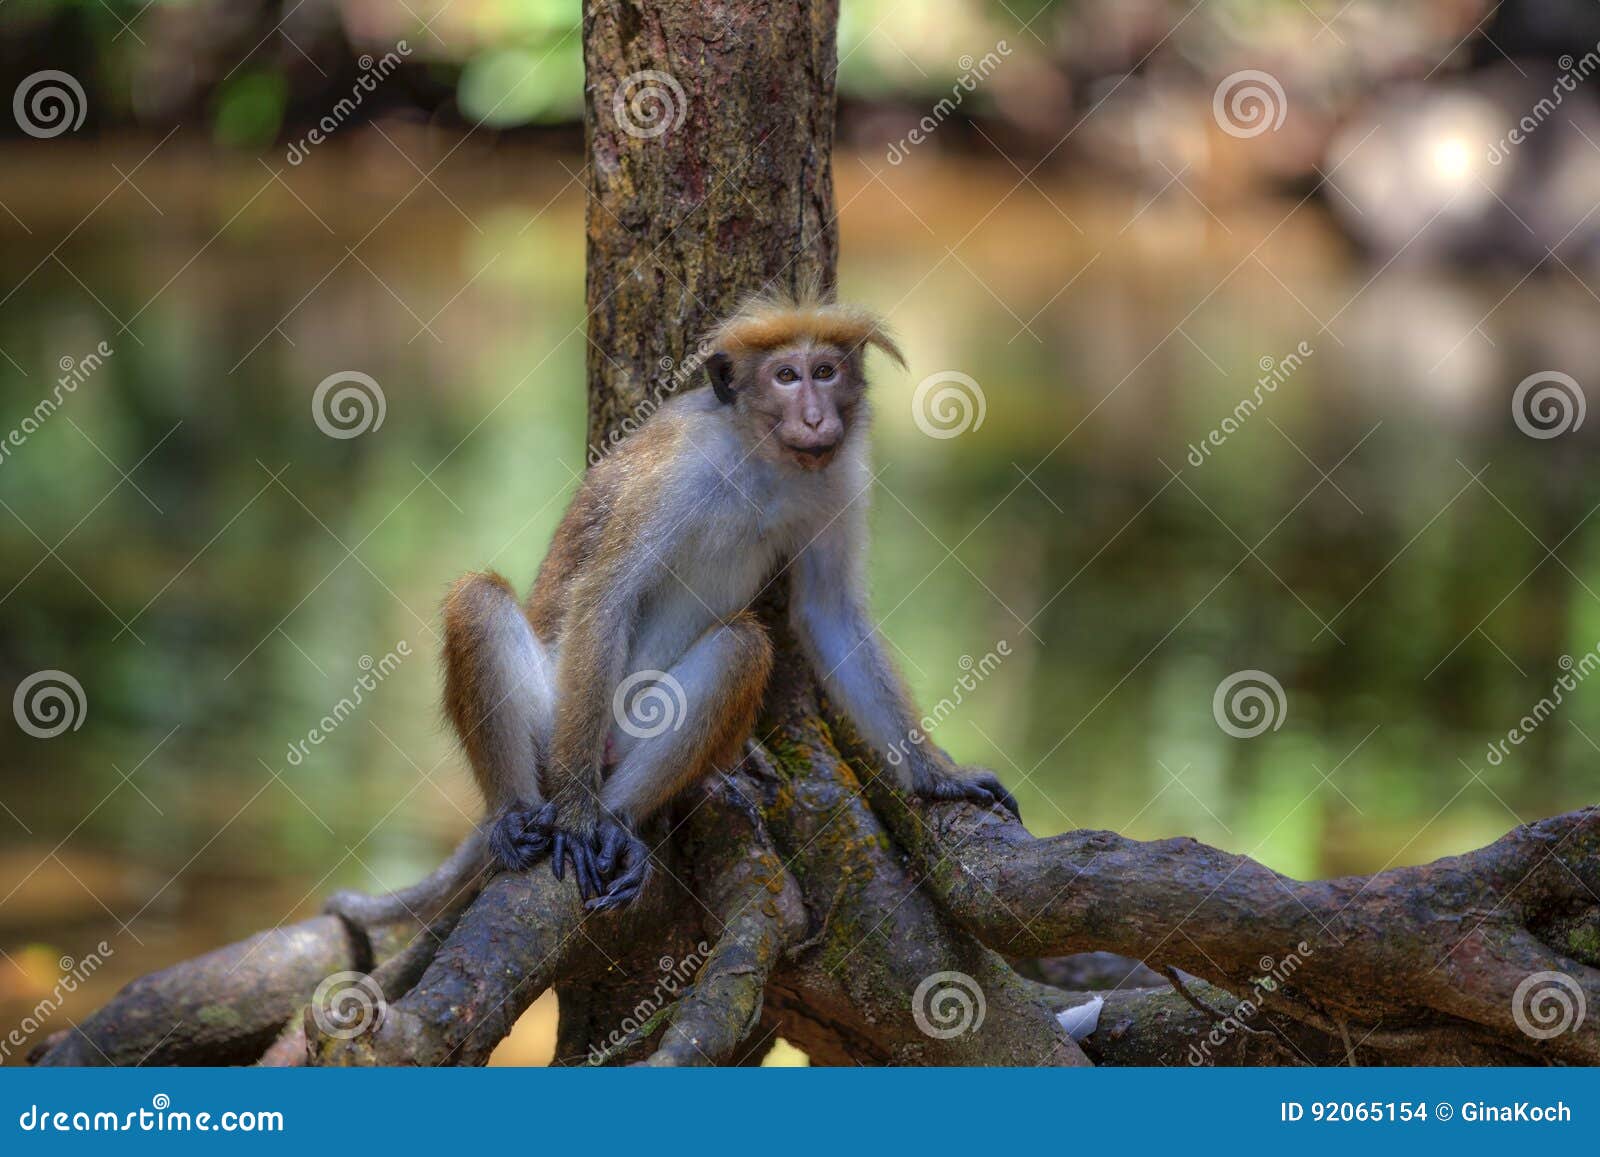 little wilde green monkeys or guenons characterize the landscape of the rainforests